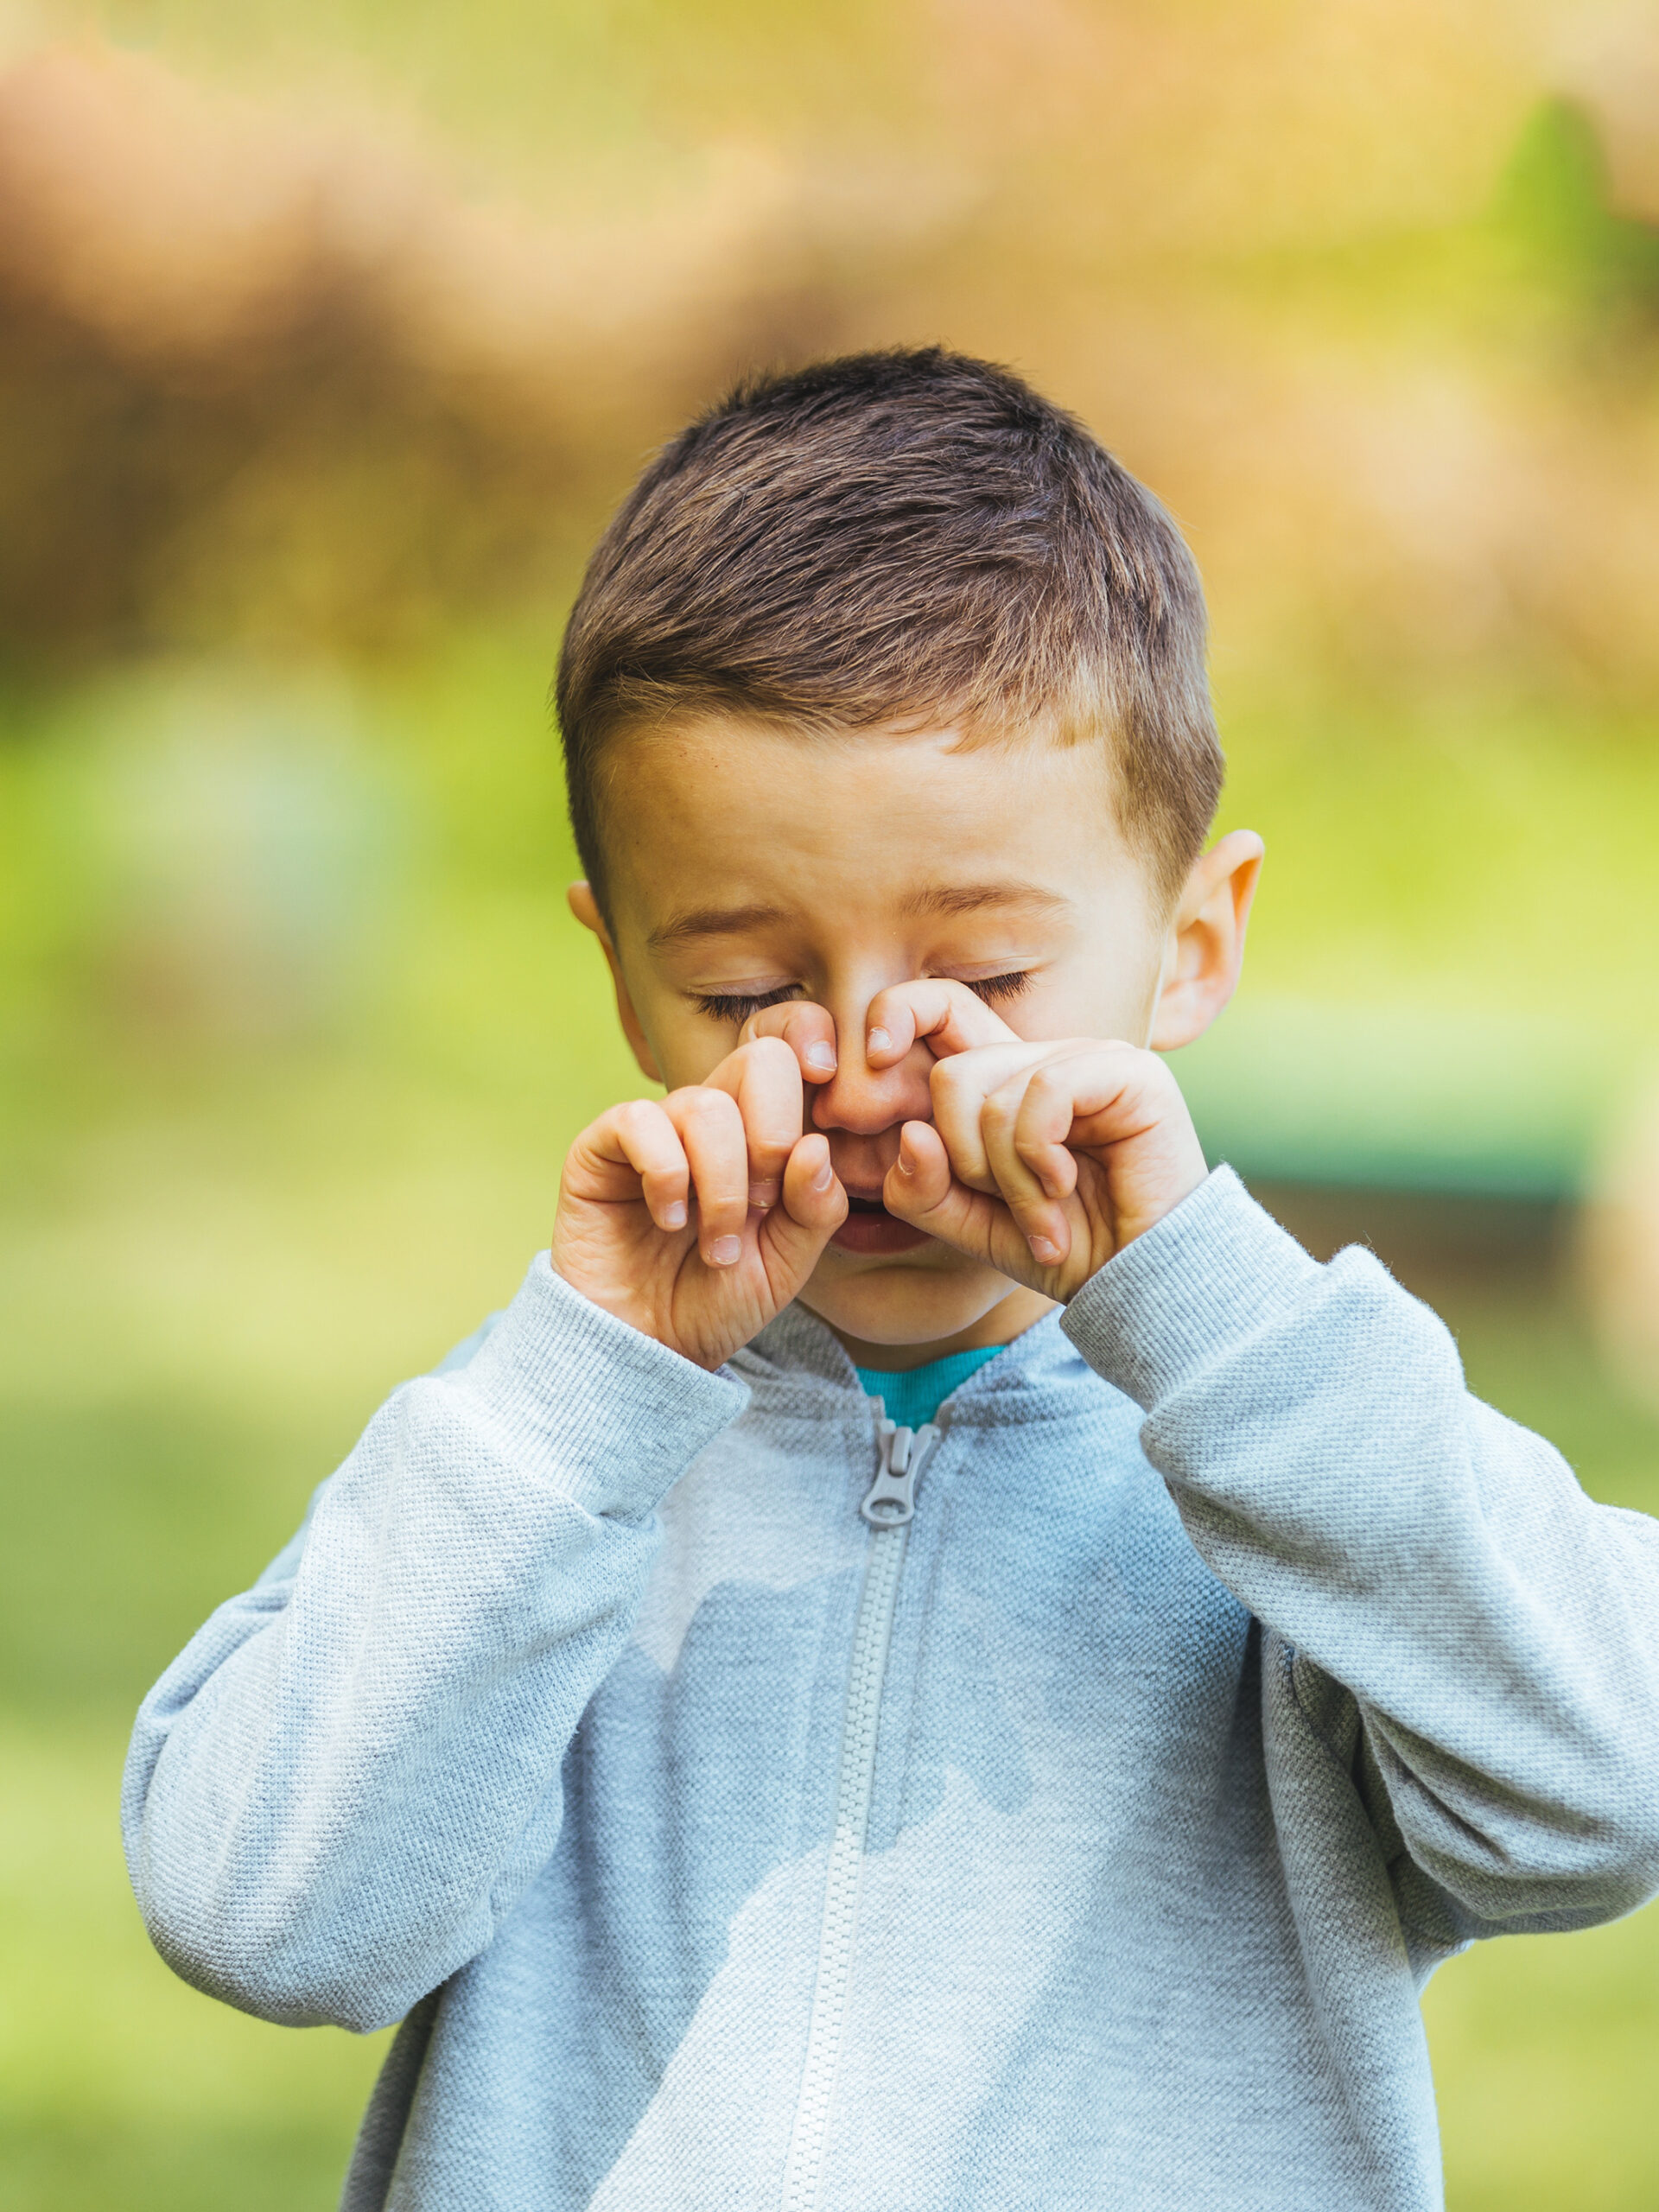 Child rubbing nose while standing outside - How to manage seasonal allergies in kids